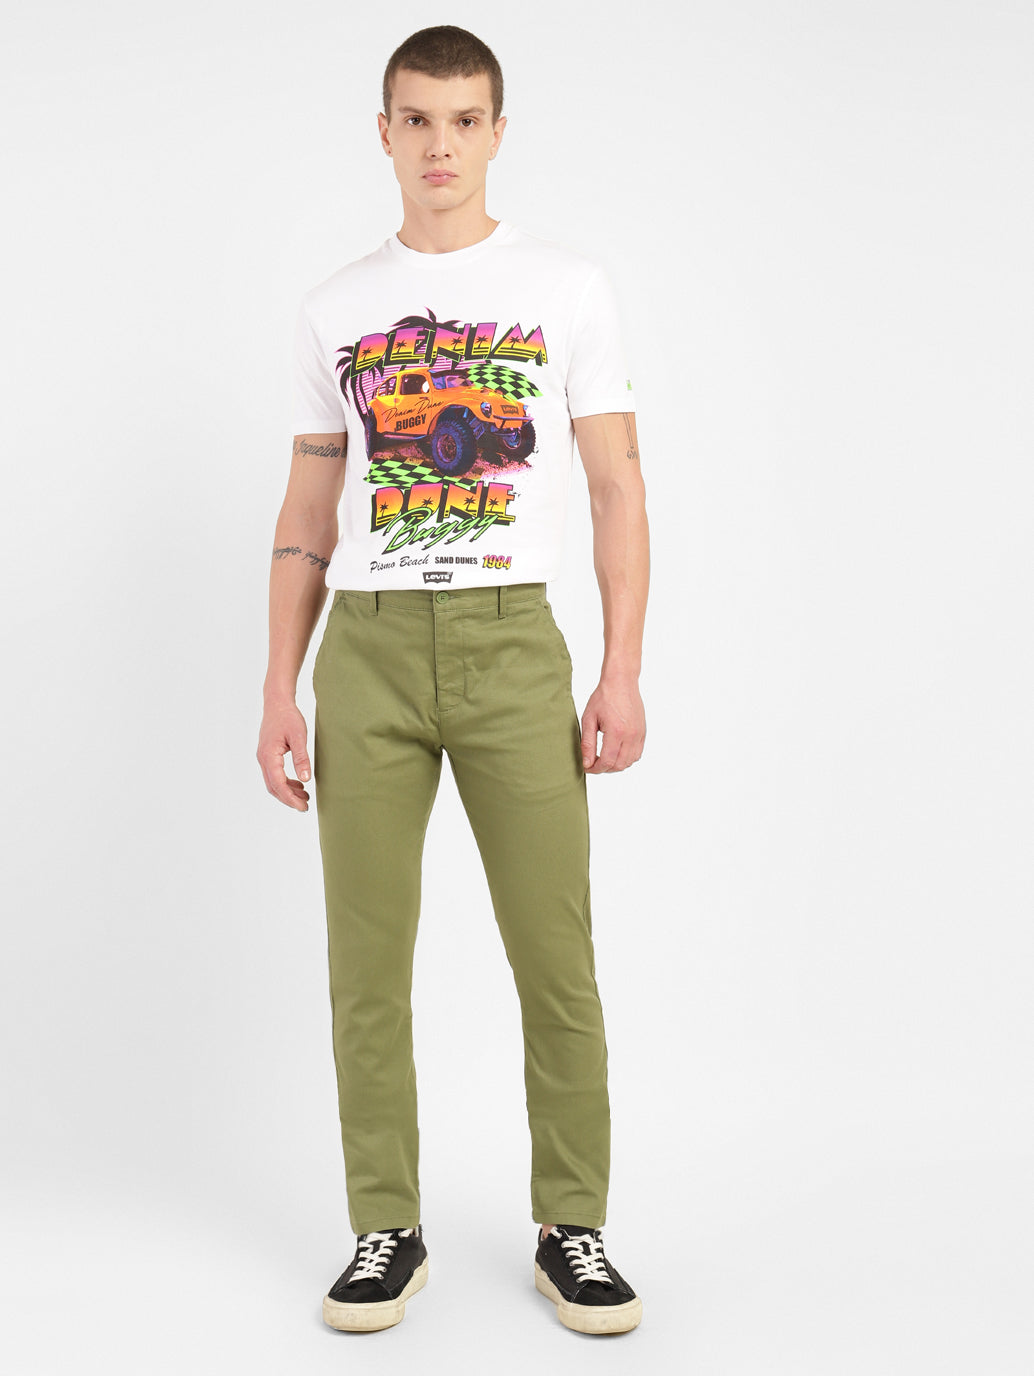 Men's Green Slim Tapered Fit Trousers